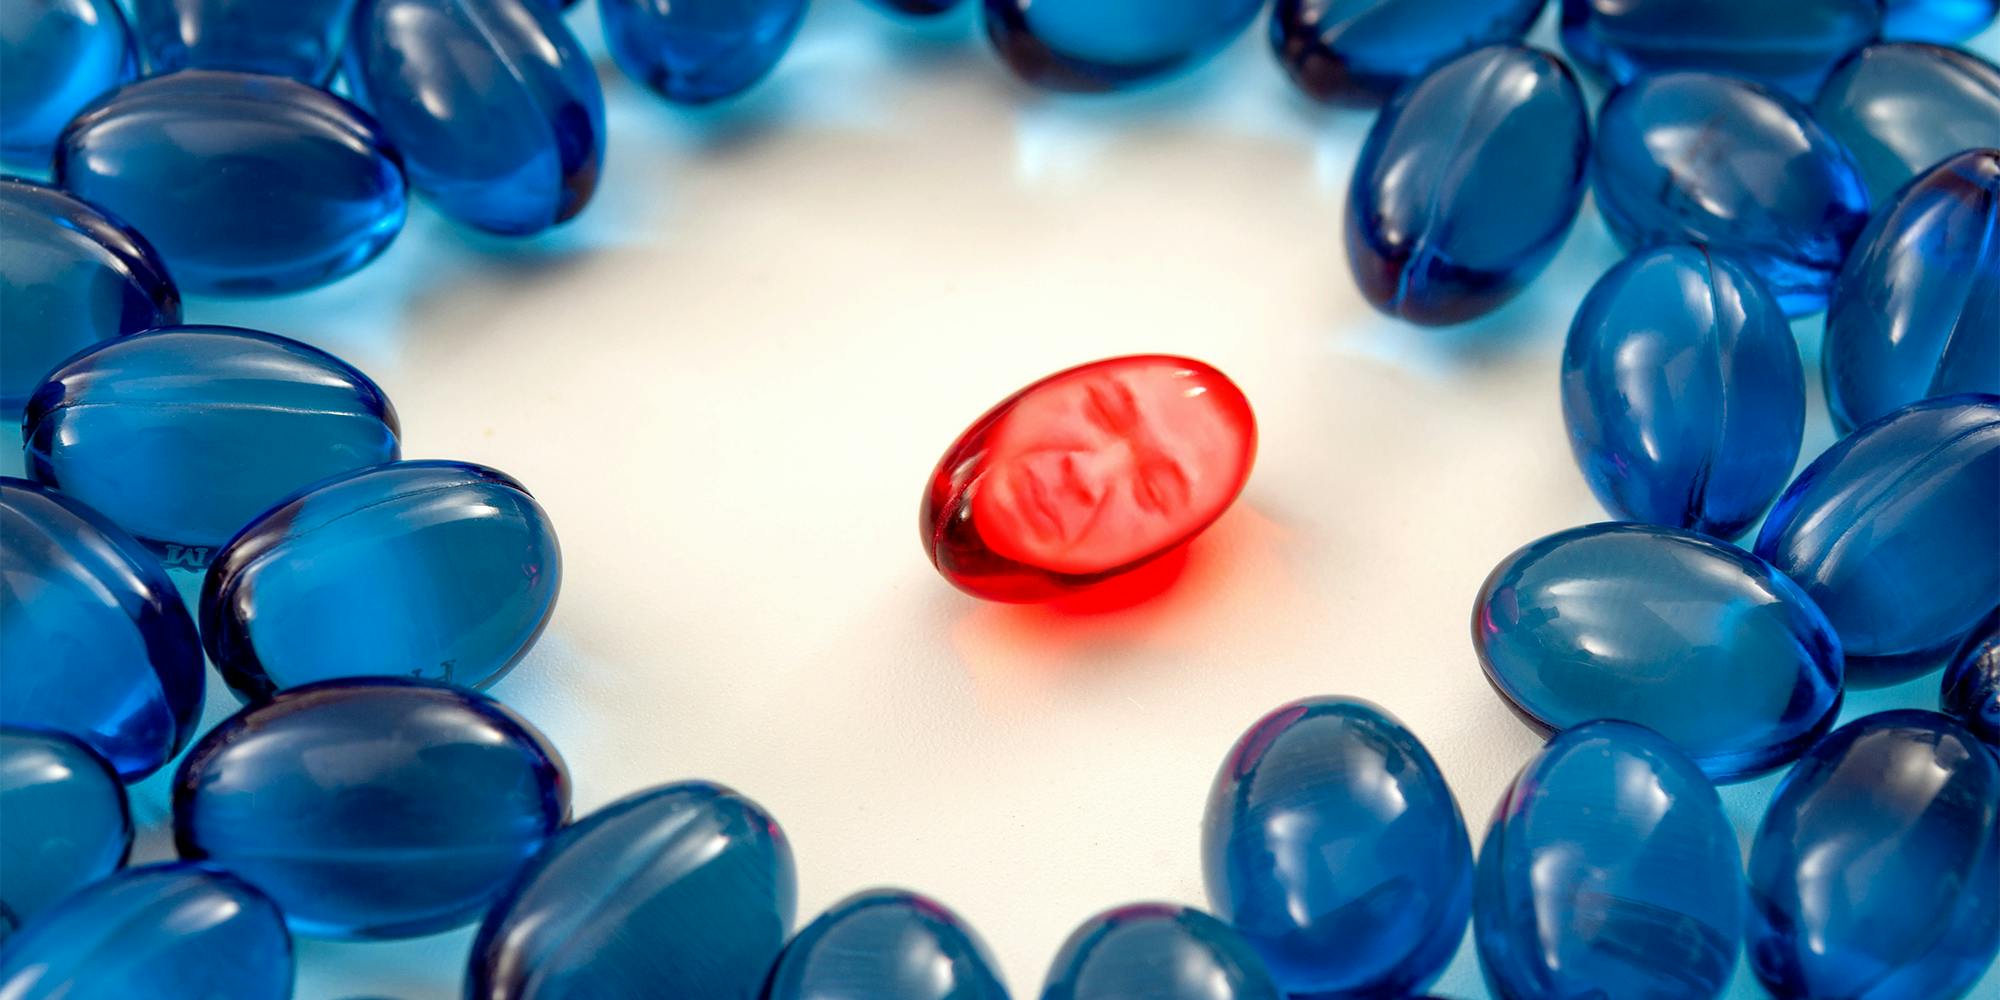 Kyle Rittenhouse crying as red pill in the center of blue pills